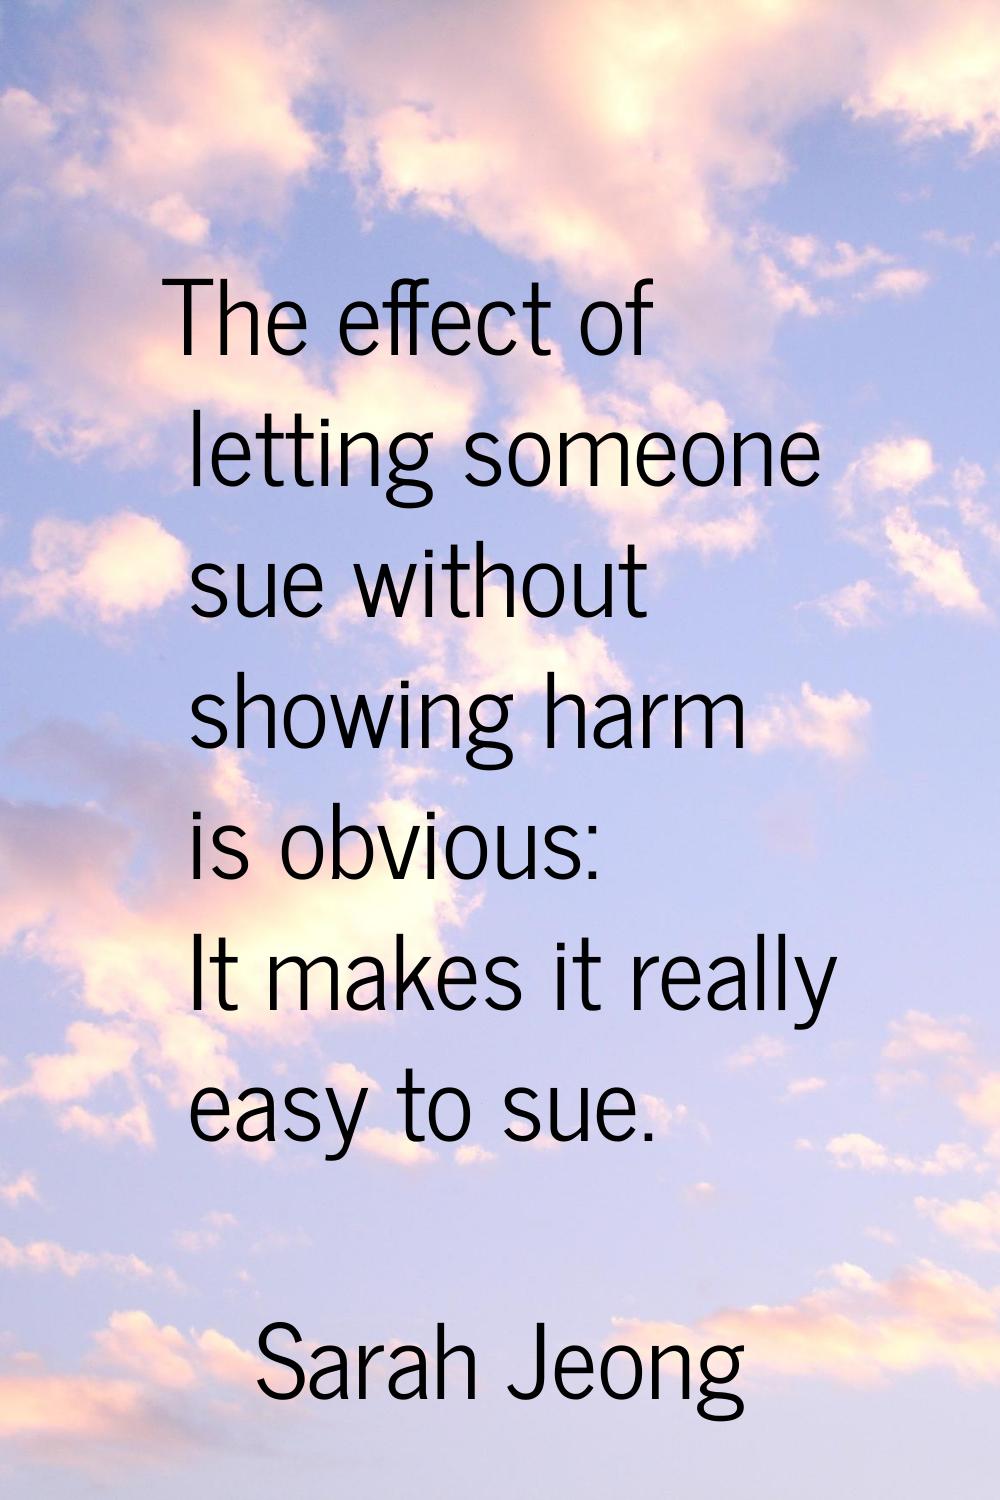 The effect of letting someone sue without showing harm is obvious: It makes it really easy to sue.